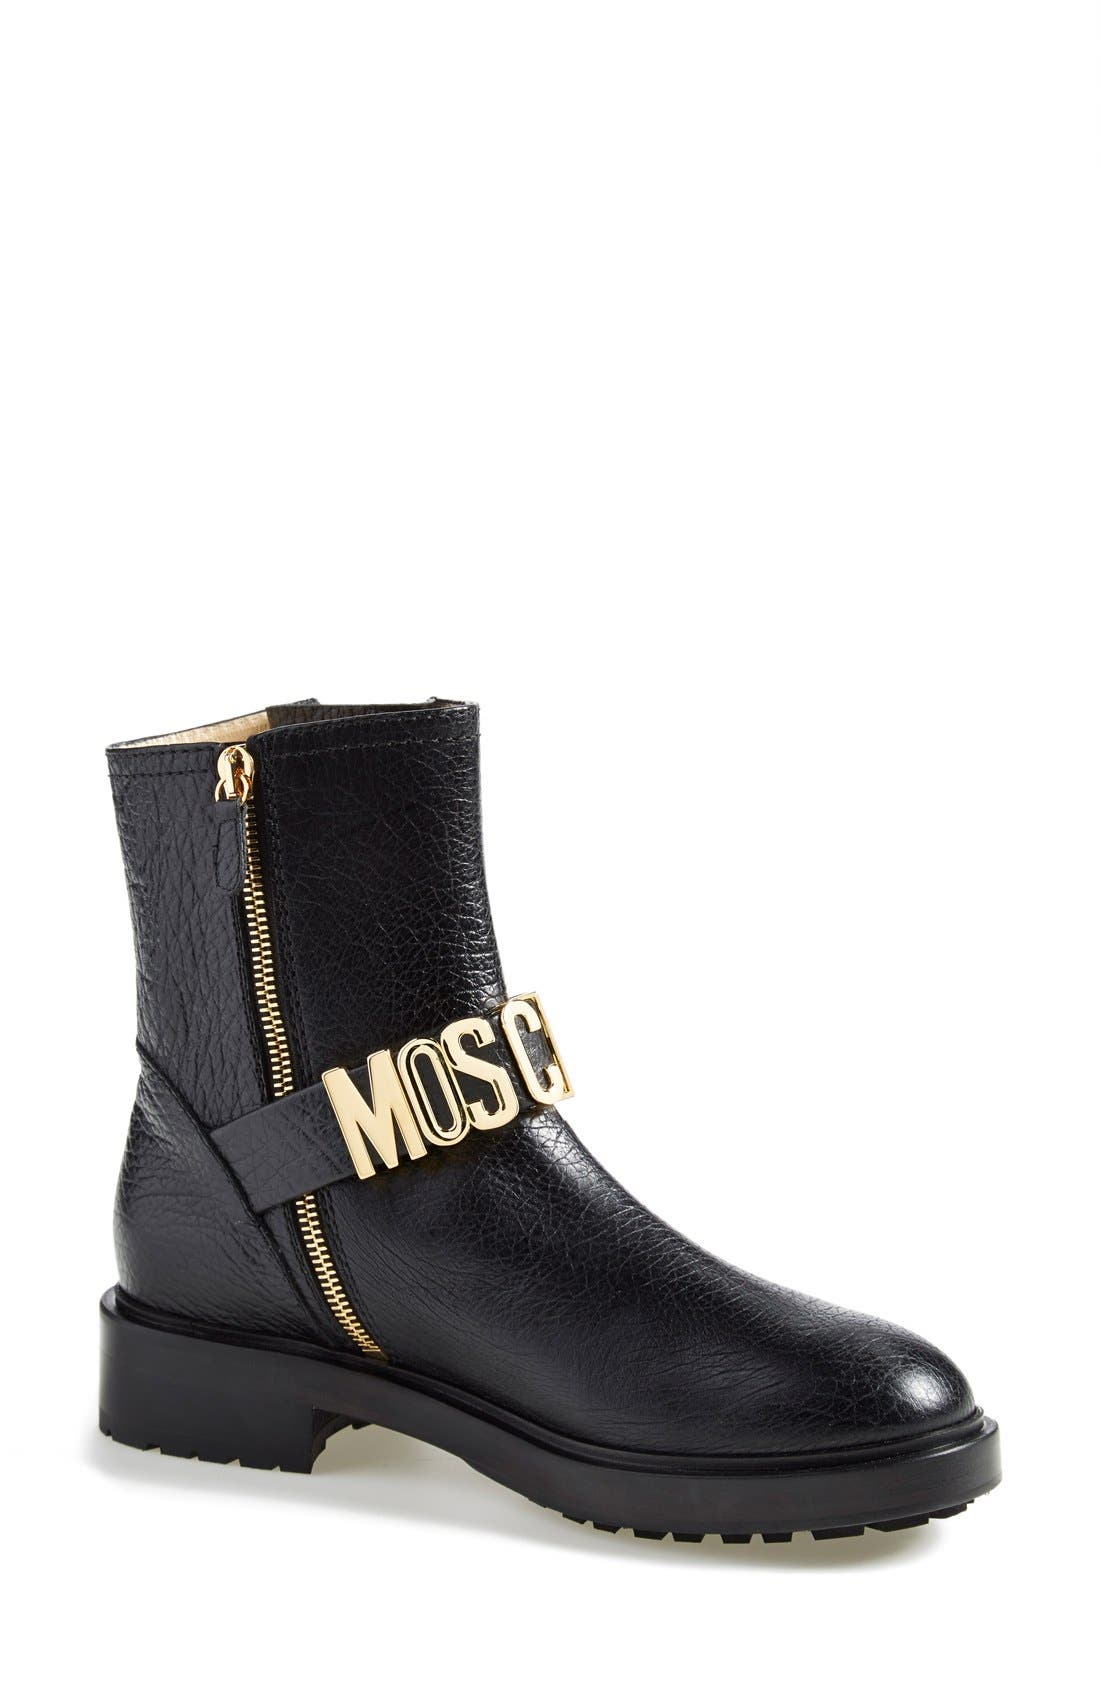 moschino space boots